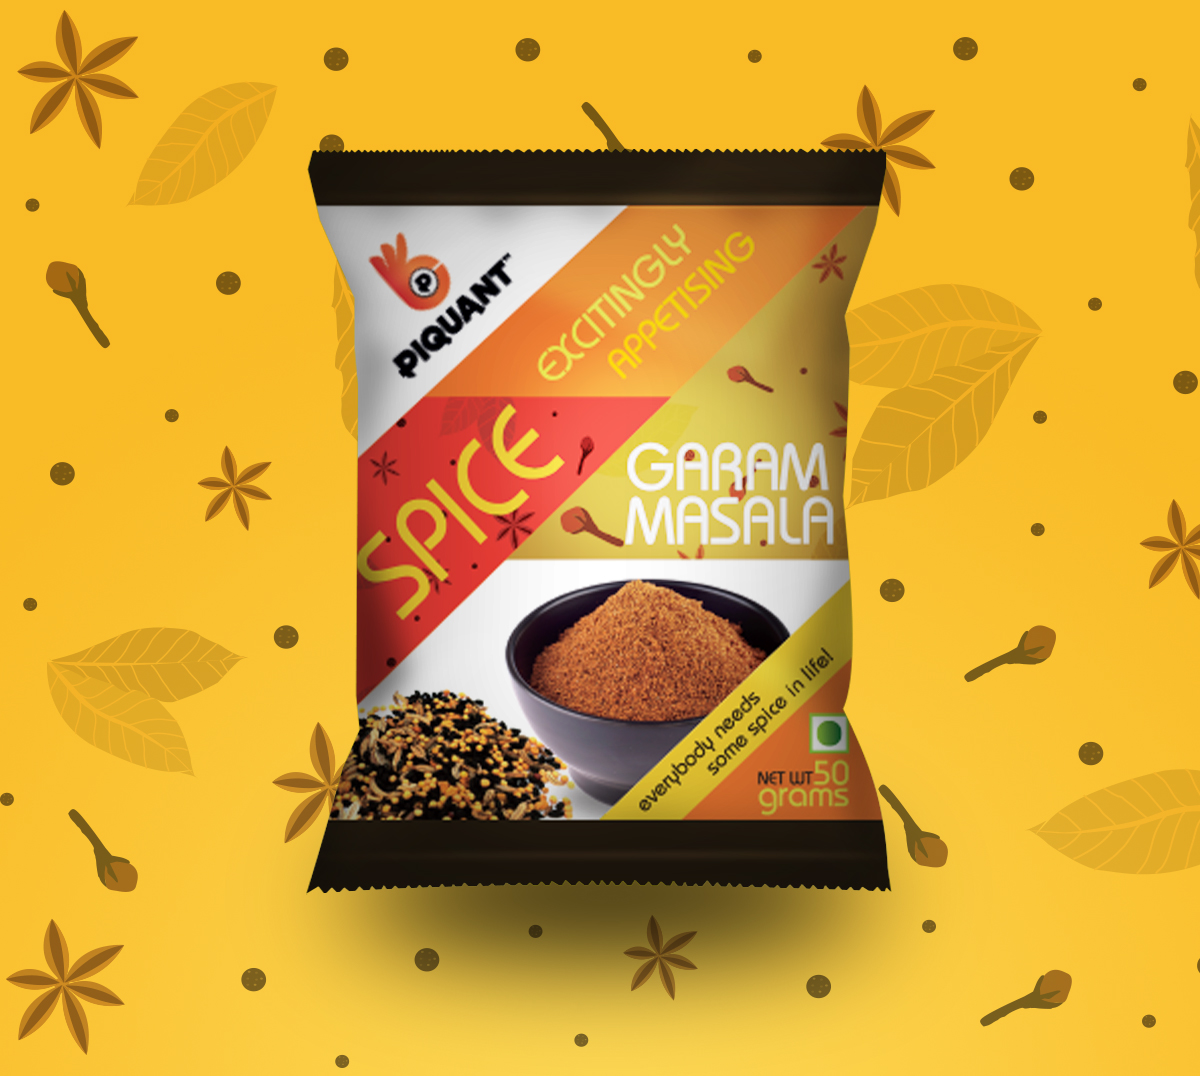 piquant packaging design moonydancer illustrations spices Food Packaging Retail spice pouches retail packaging